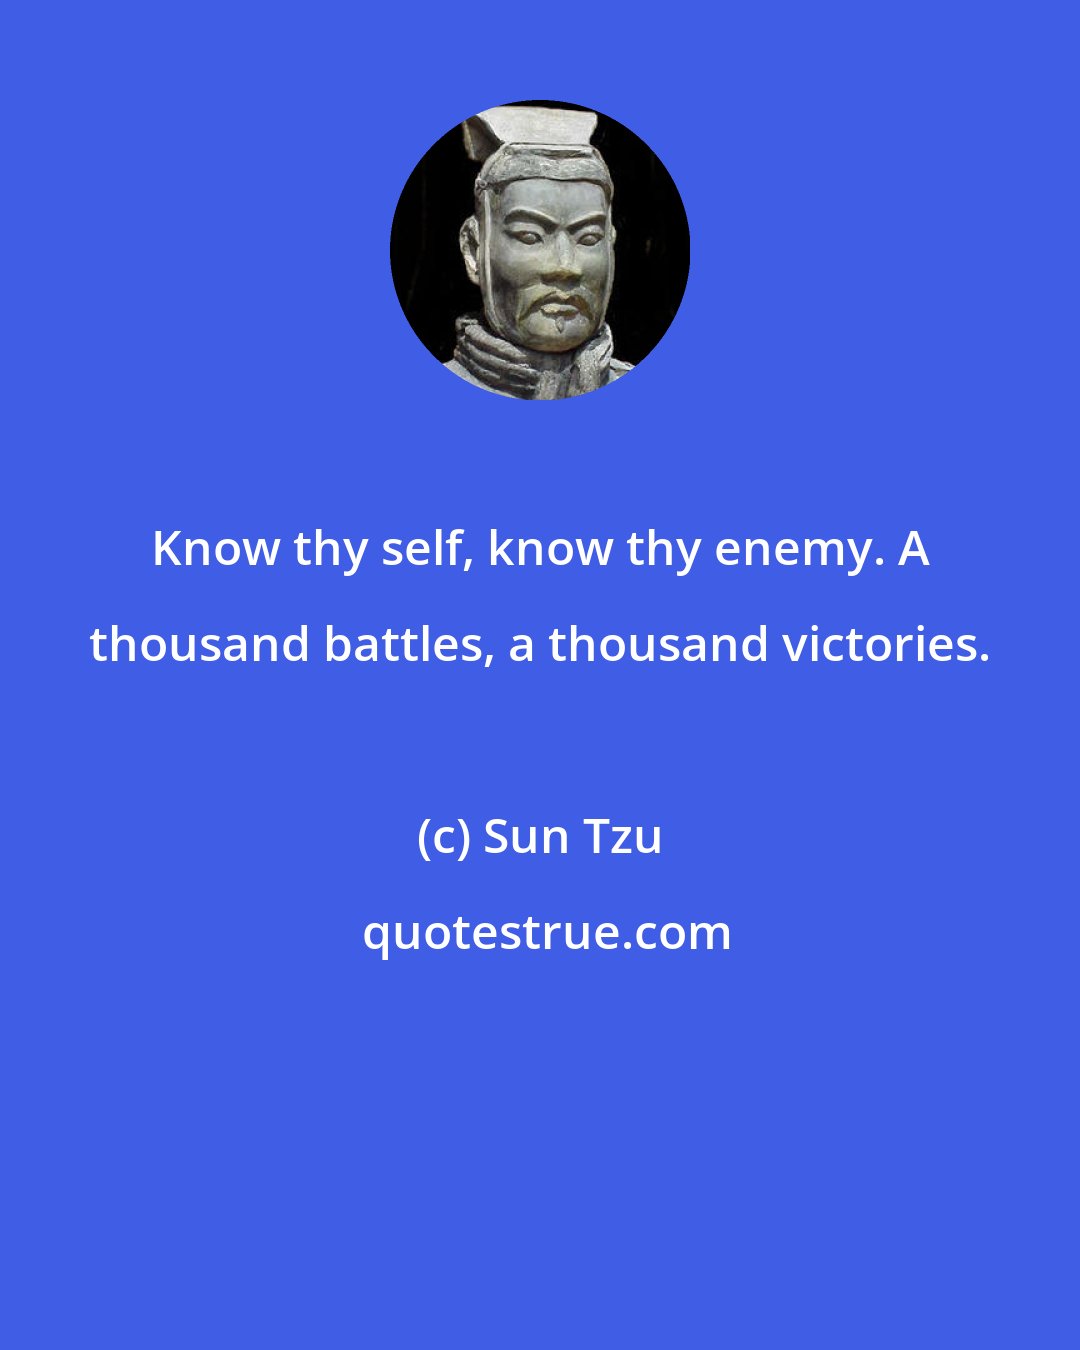 Sun Tzu: Know thy self, know thy enemy. A thousand battles, a thousand victories.